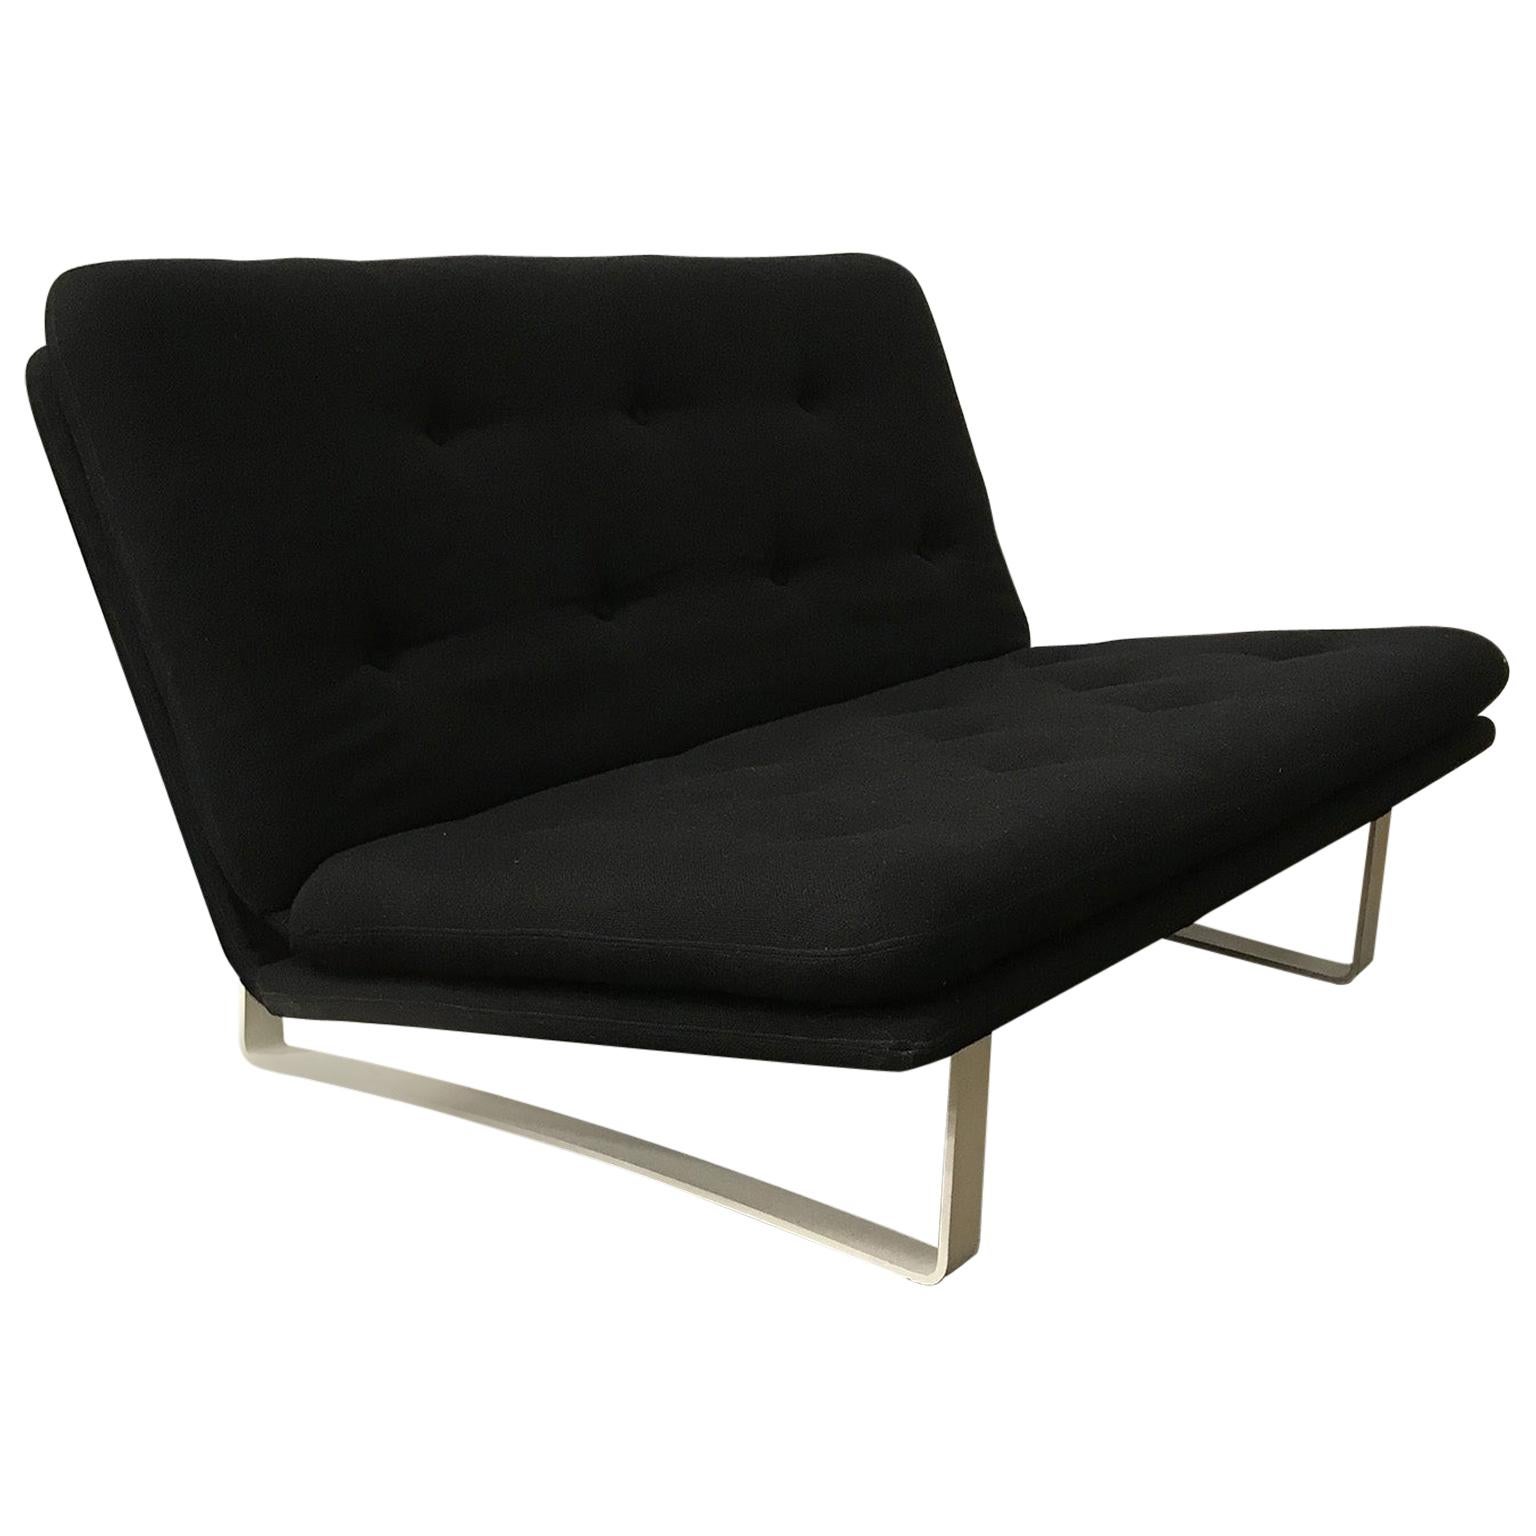 1968, Kho Liang Ie for Artifort, White Base 2-Seat, Redone in Black Fabric